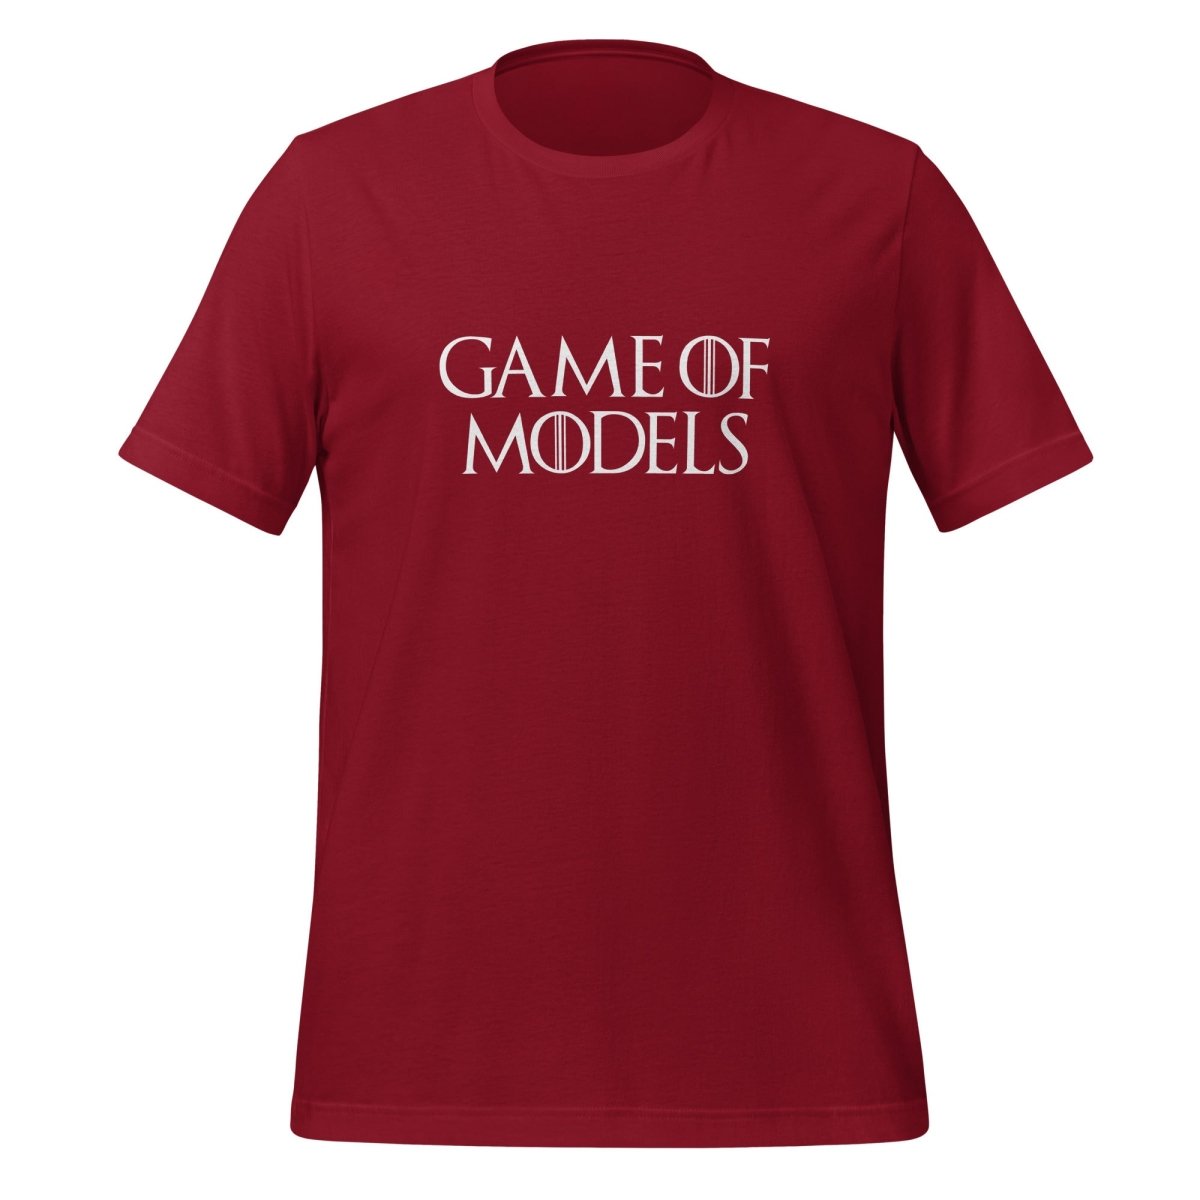 Game of Models T - Shirt (unisex) - Cardinal - AI Store